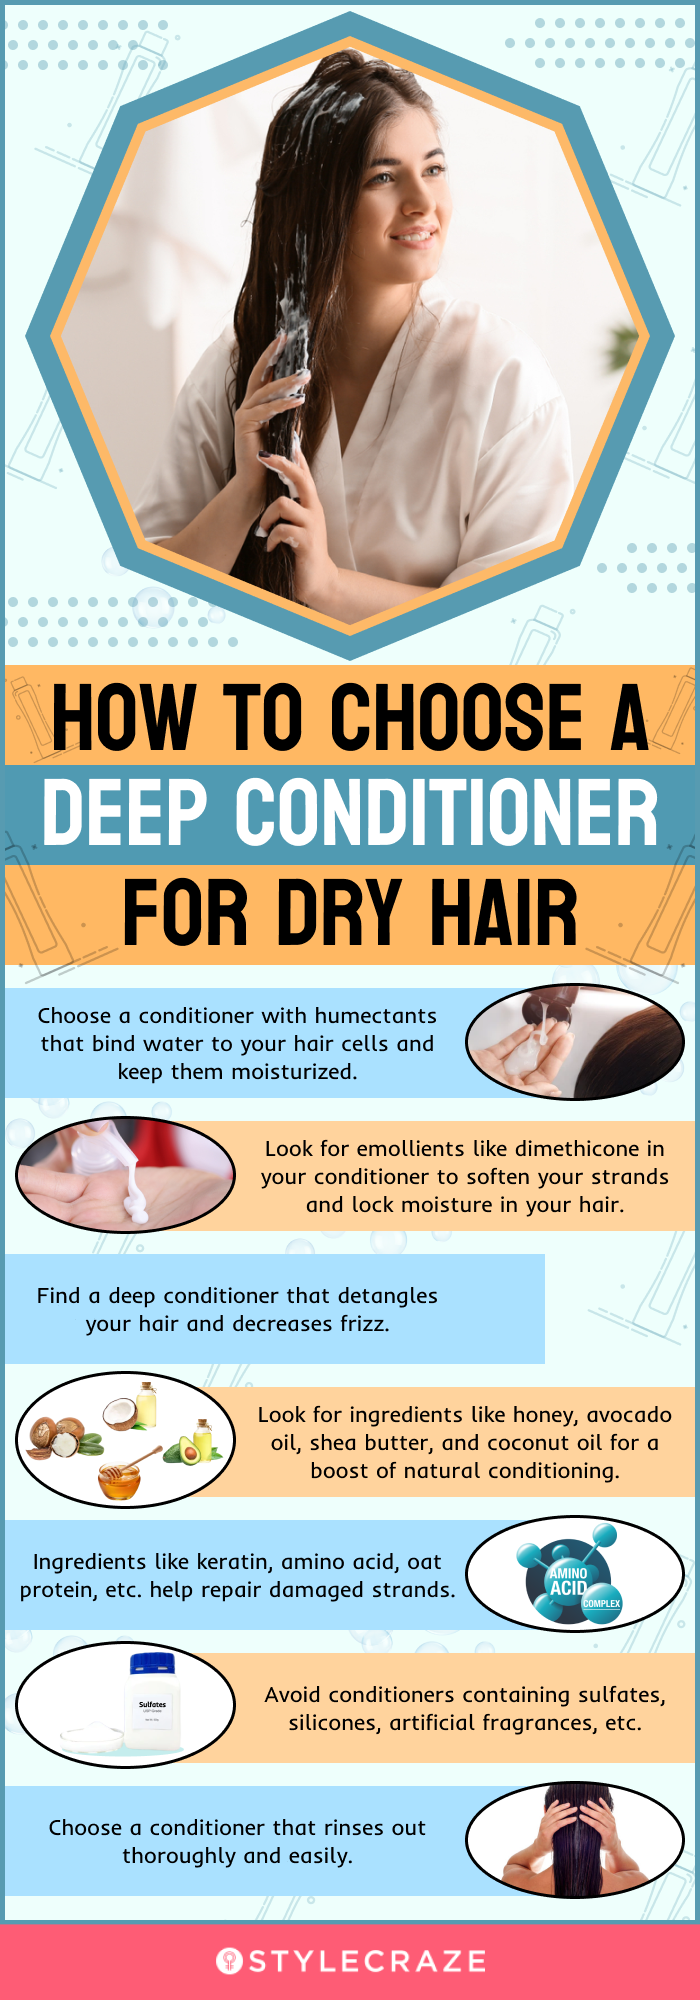 How to choose a deep conditioner for dry hair (infographic)